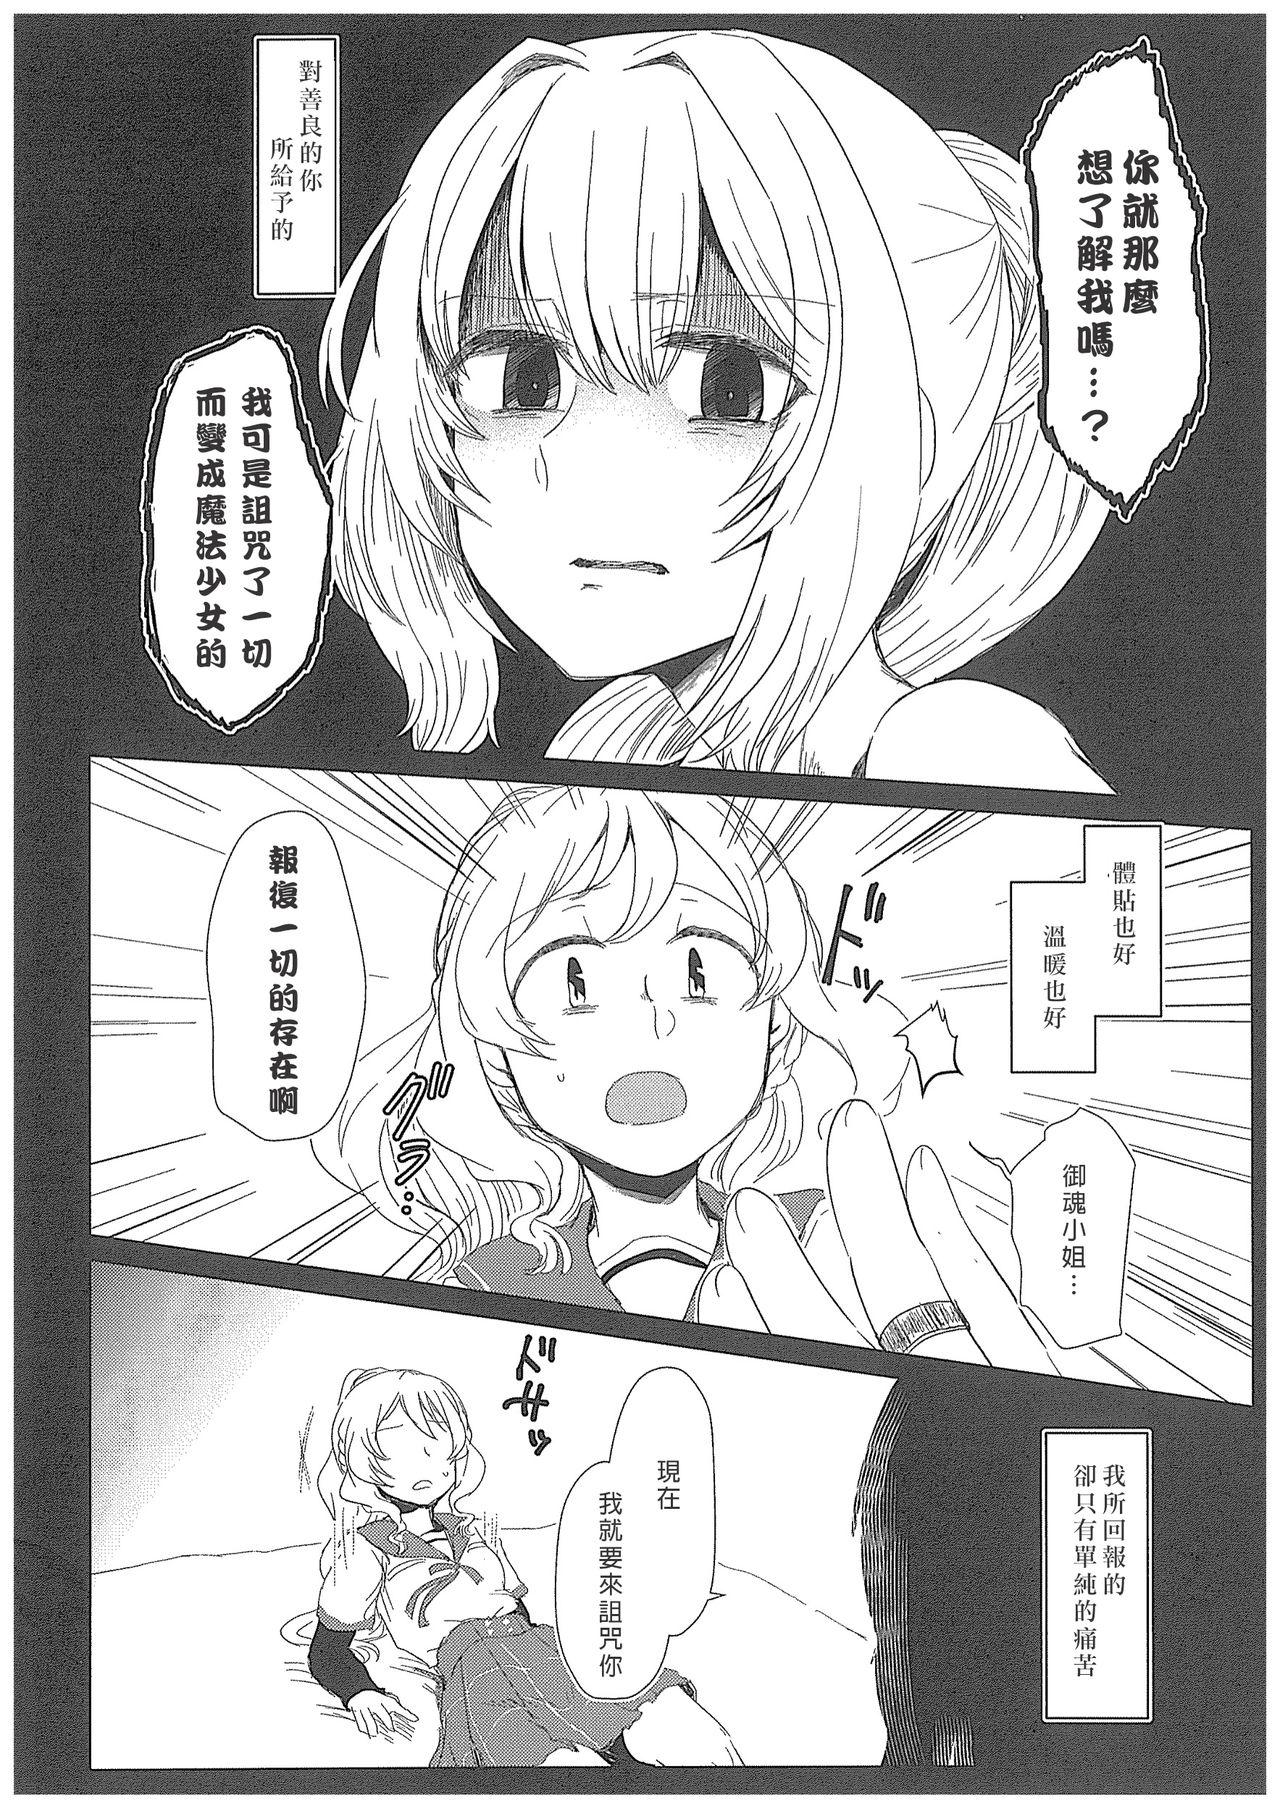 Busty From nothing,nothing comes|漢堡牛排不能無中生有 - Puella magi madoka magica side story magia record Ass Fucked - Page 11